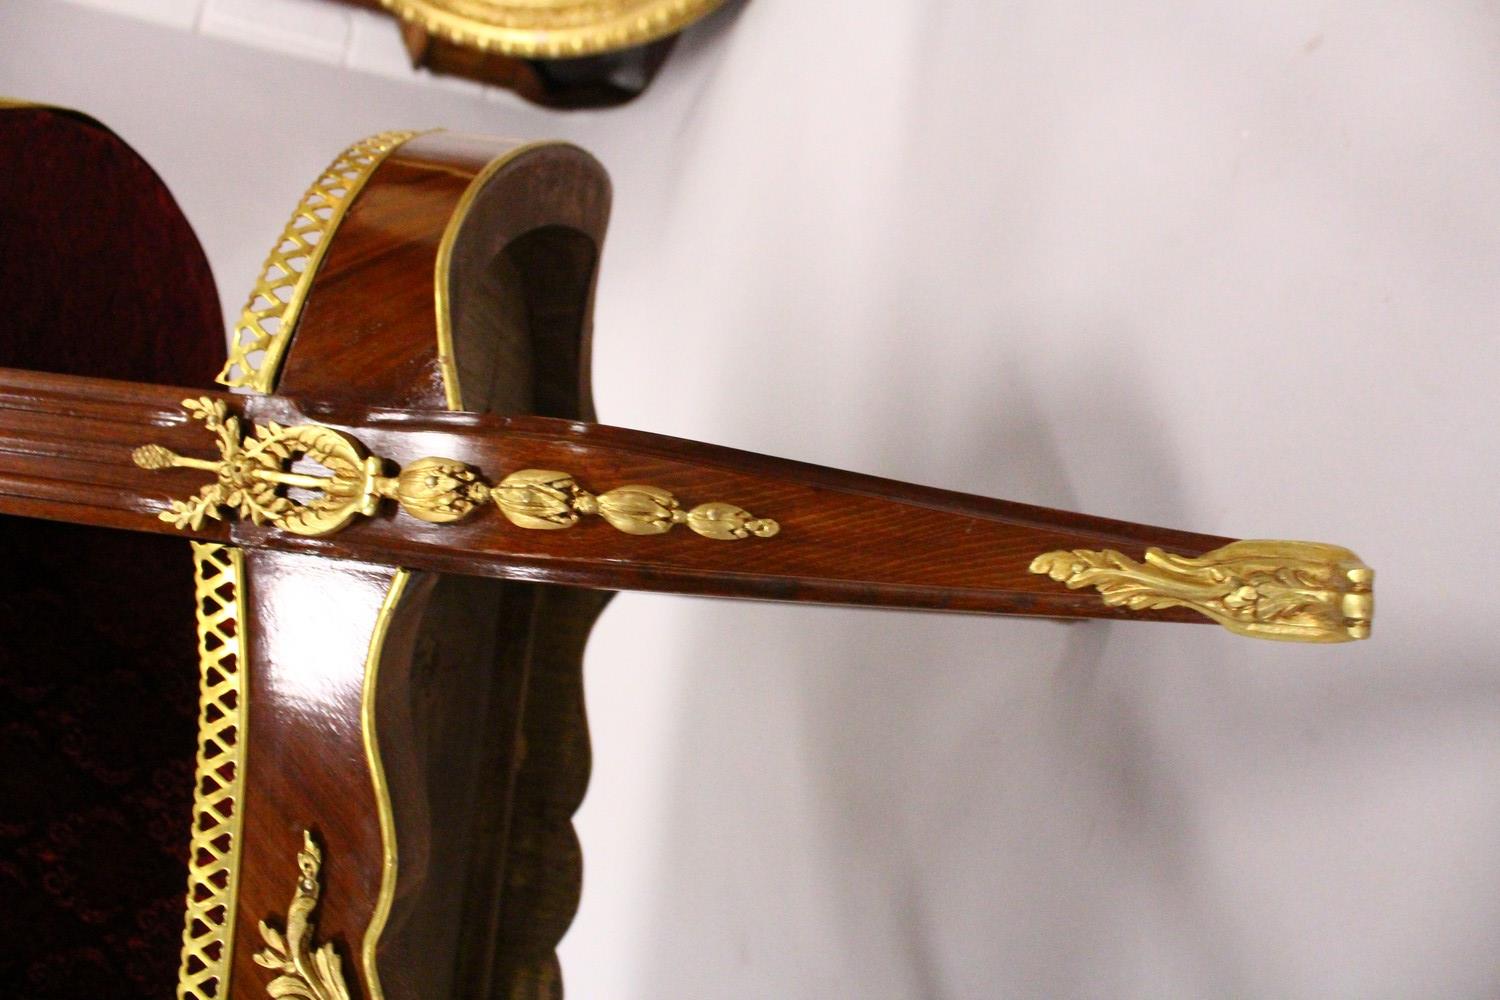 A FRENCH STYLE MARQUETRY AND ORMOLU KIDNEY SHAPED ETAGERE, on cabriole legs. 74cms wide x 79cms high - Image 6 of 6